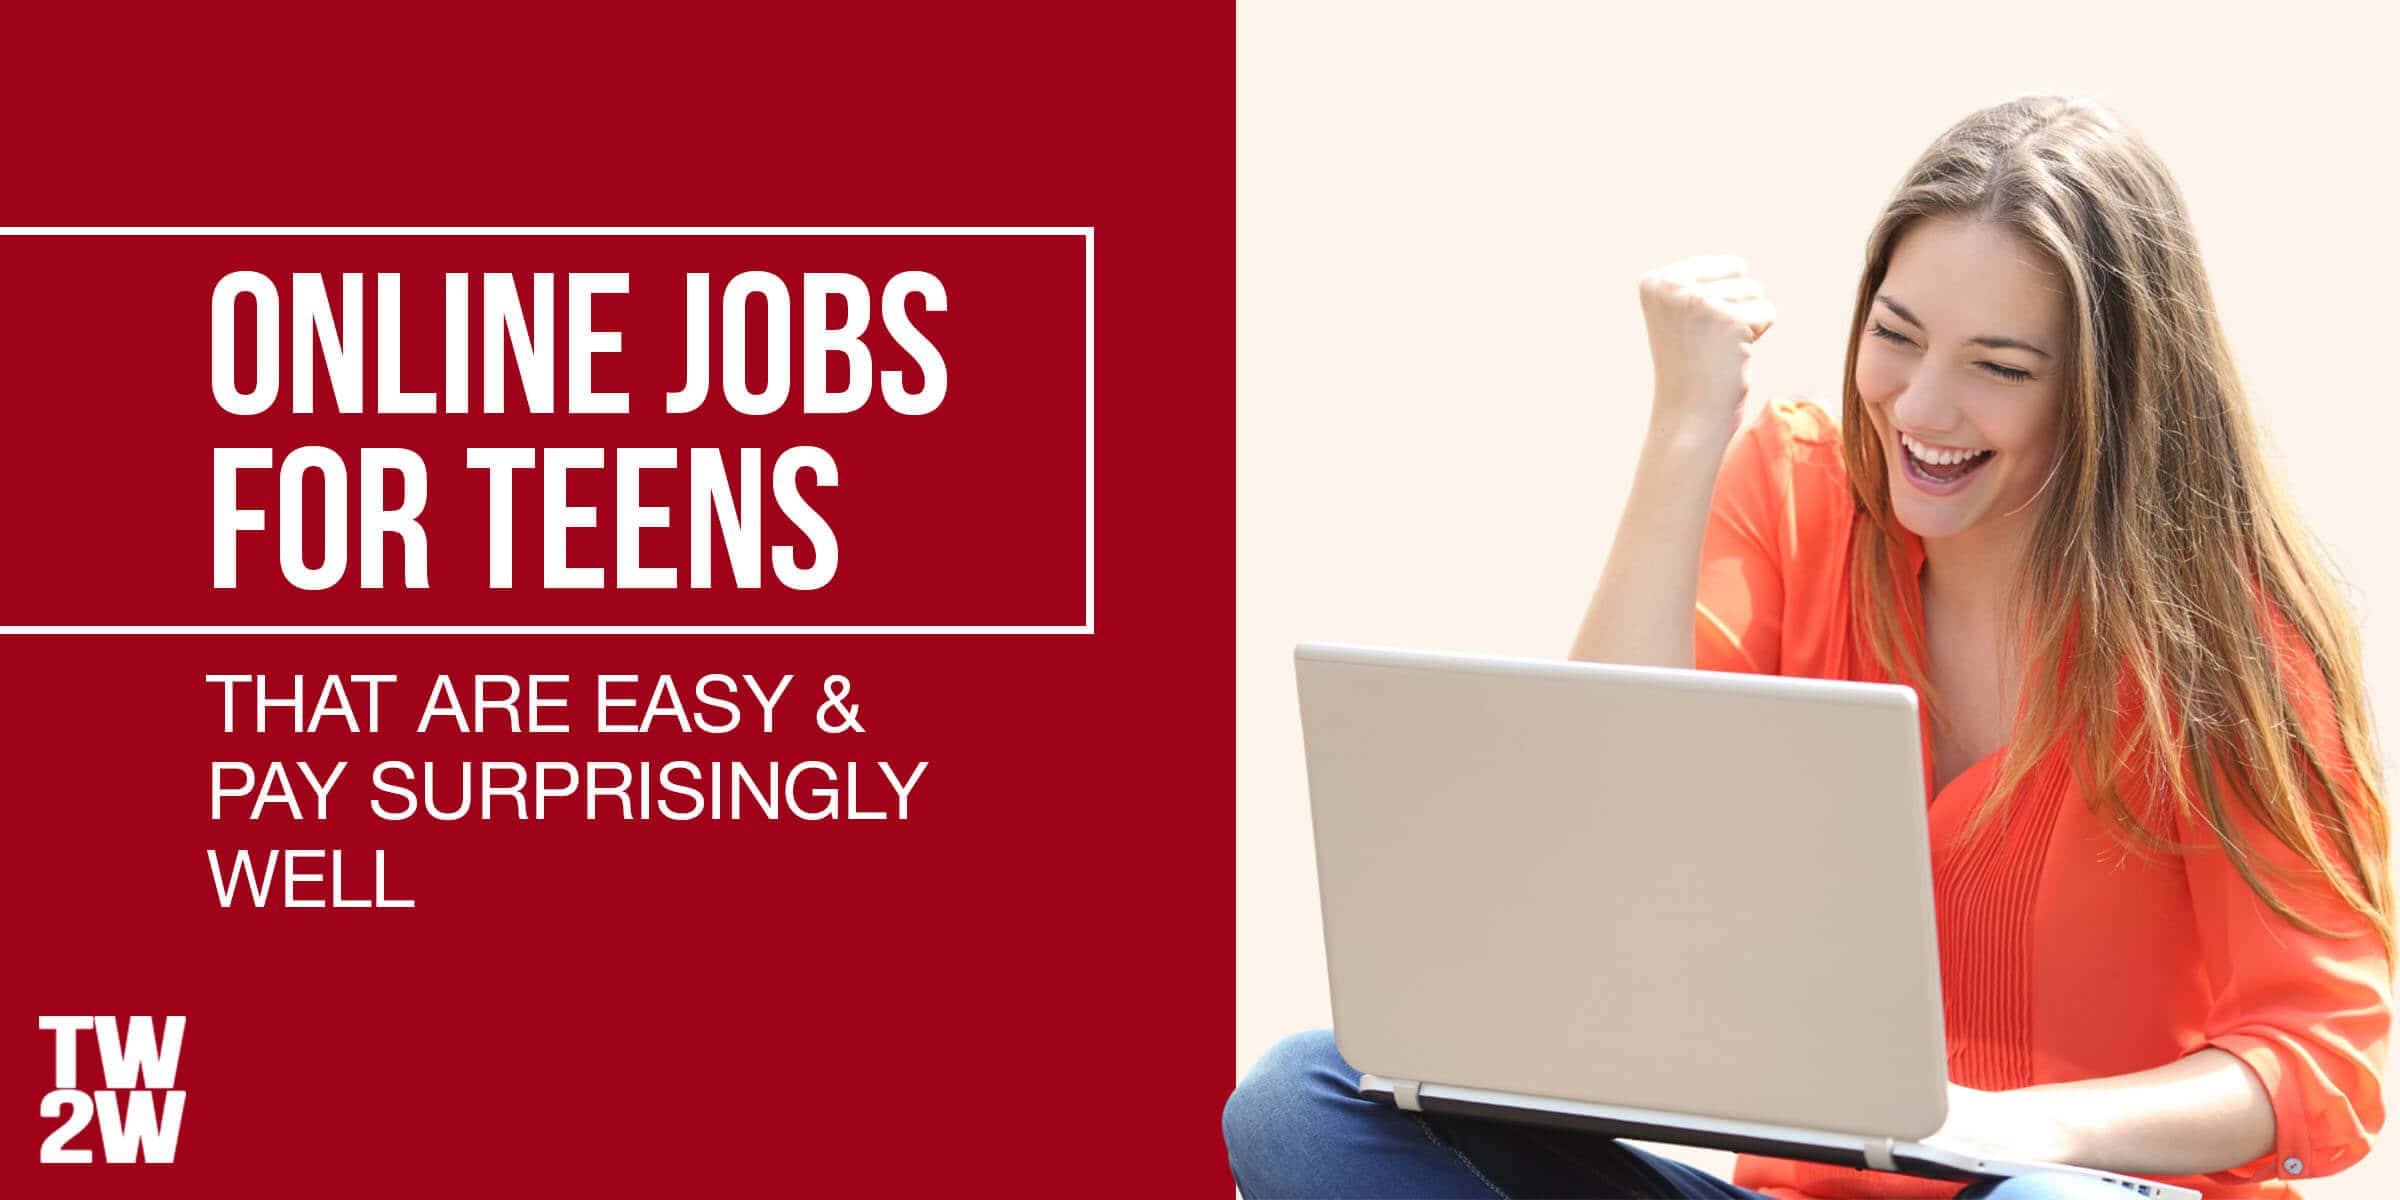 Work From Home & Earn Extra Money as an Online Assistant No Experience  Required! in 2023